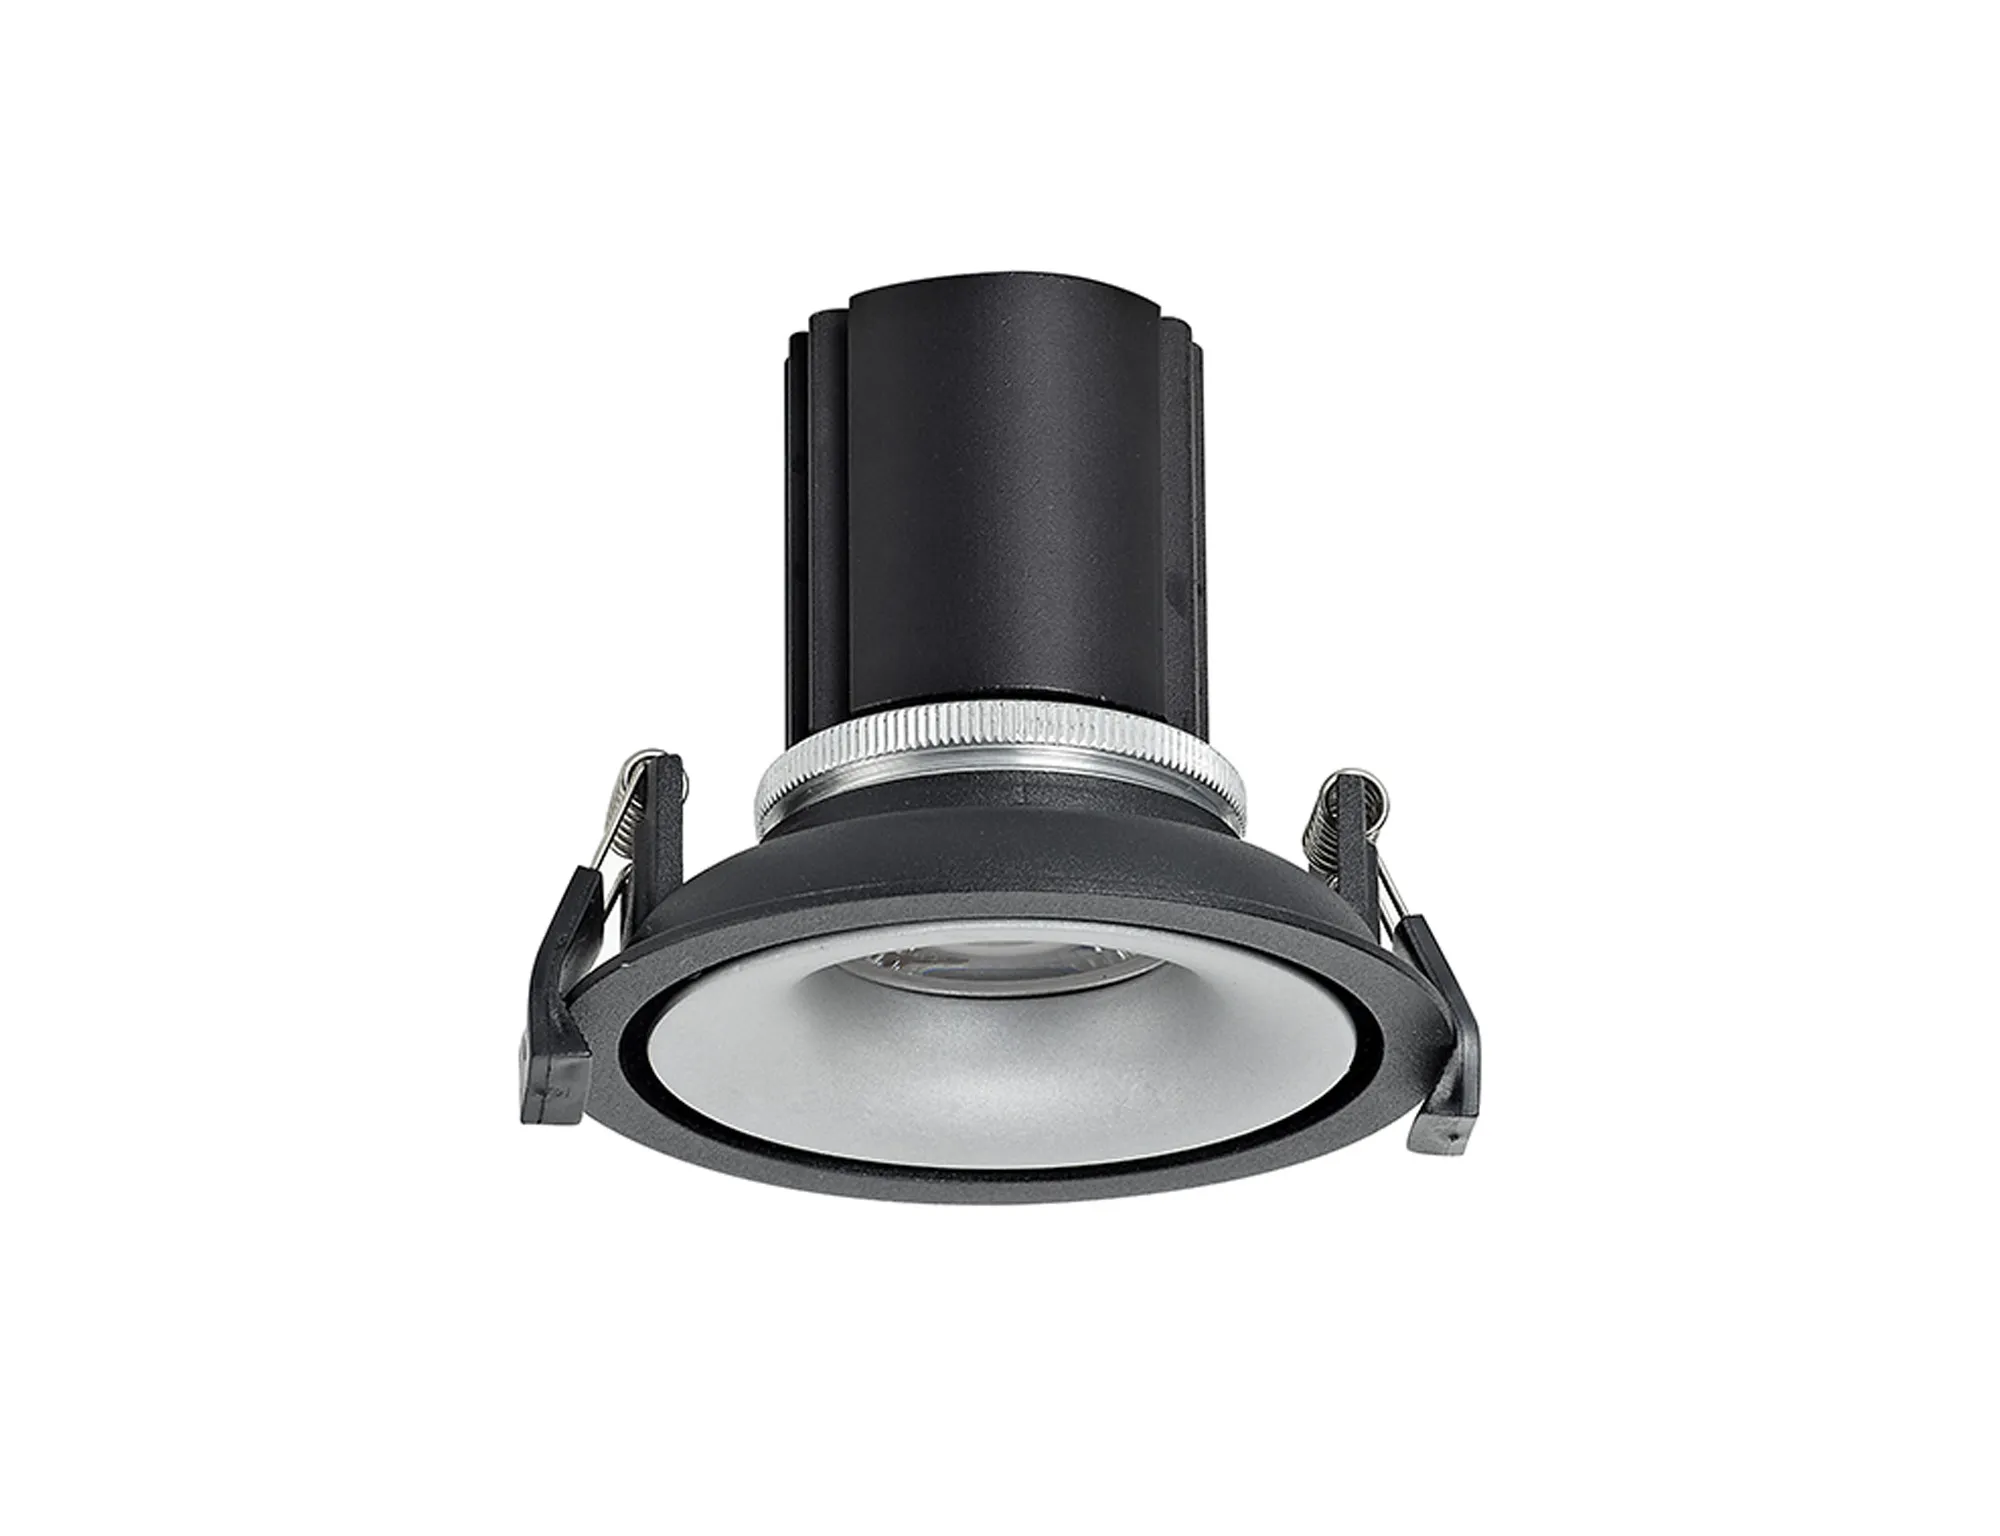 DM202156  Bolor 12 Tridonic Powered 12W 3000K 1200lm 24° CRI>90 LED Engine Black/Silver Fixed Recessed Spotlight; IP20